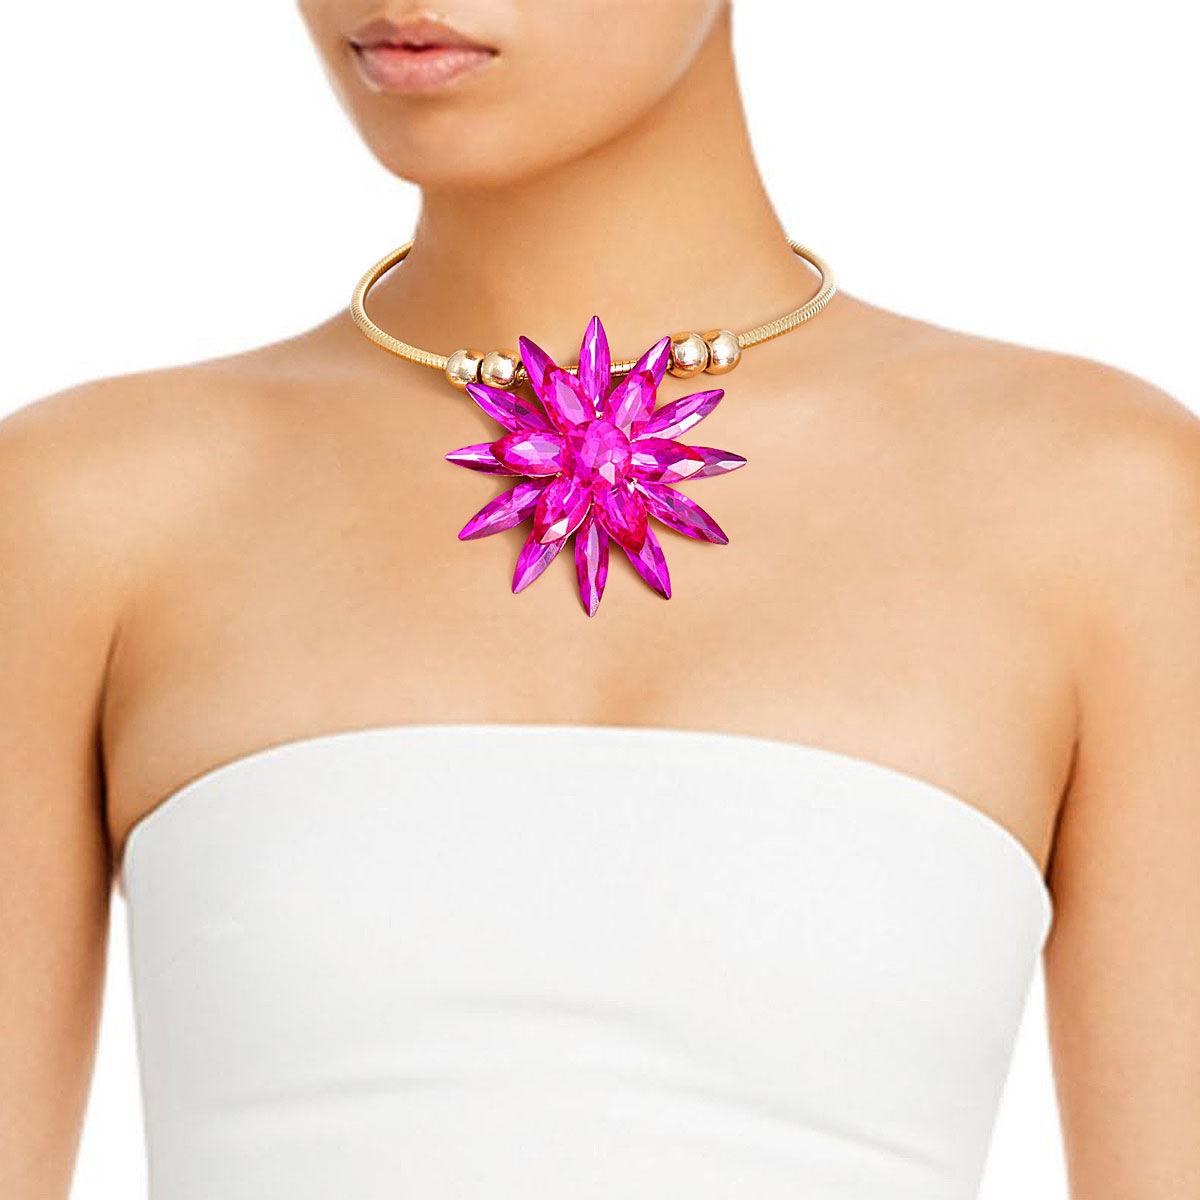 Fuchsia Color Flower Gold Tone Necklace: Add a Pop of Color to Your Outfit